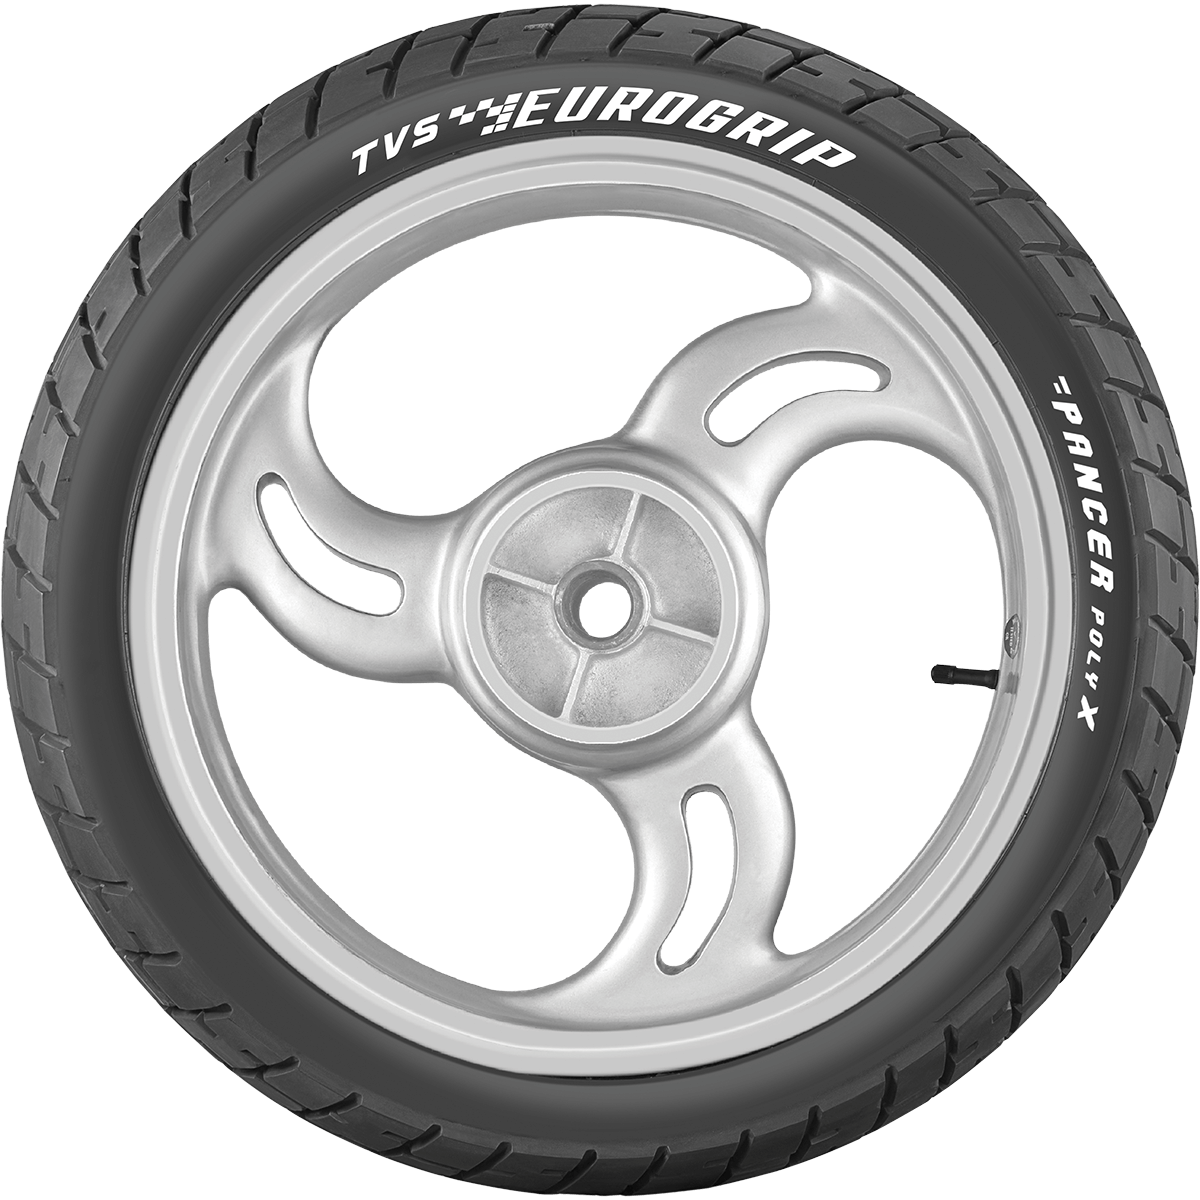 T V S Eurogrip Bike Tyrewith Alloy Wheel PNG